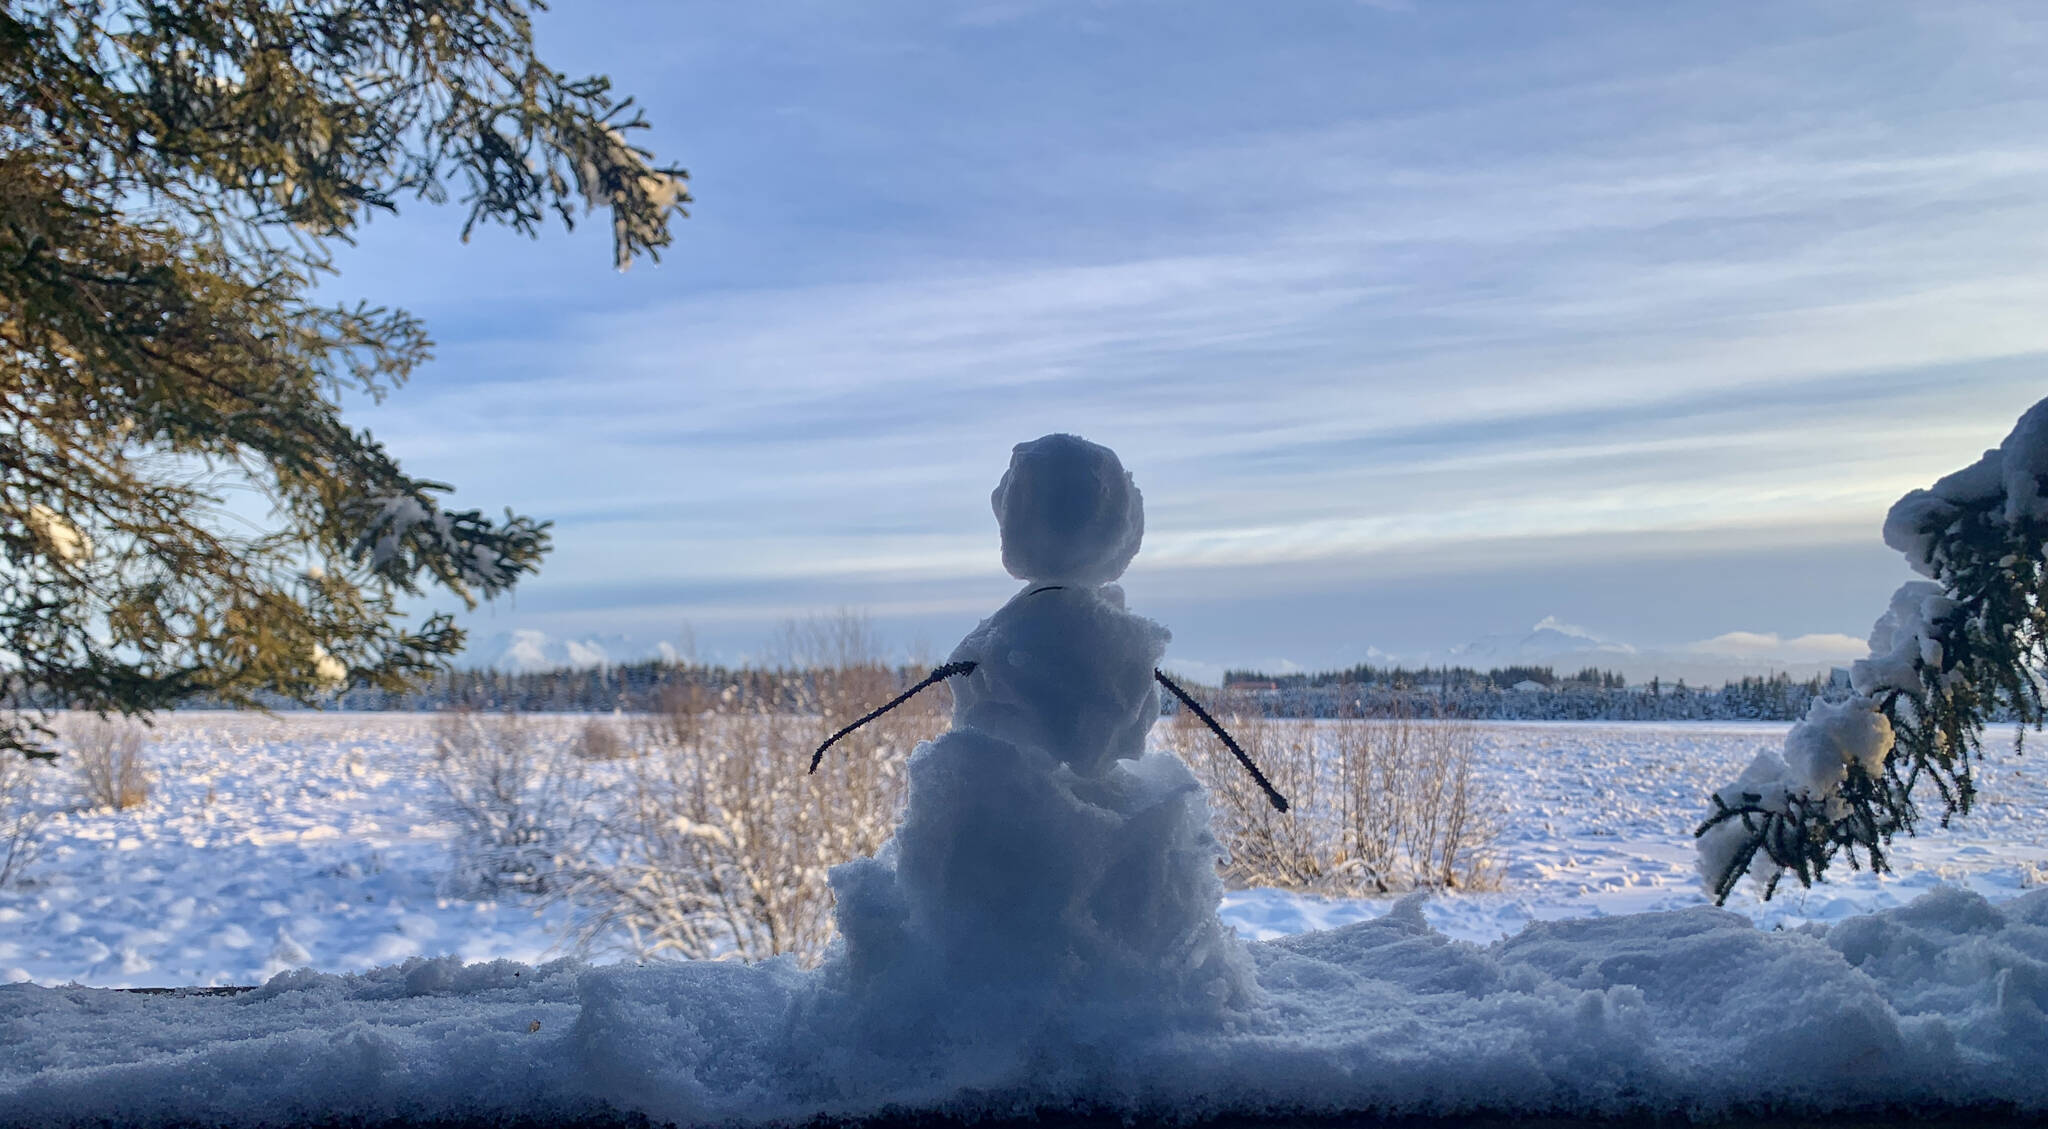 A tiny snowman looks out over Beluga Slough from the Calvin and Coyle trail, Jan. 21, 2023, in Homer, Alaska. (Photo by Christina Whiting)